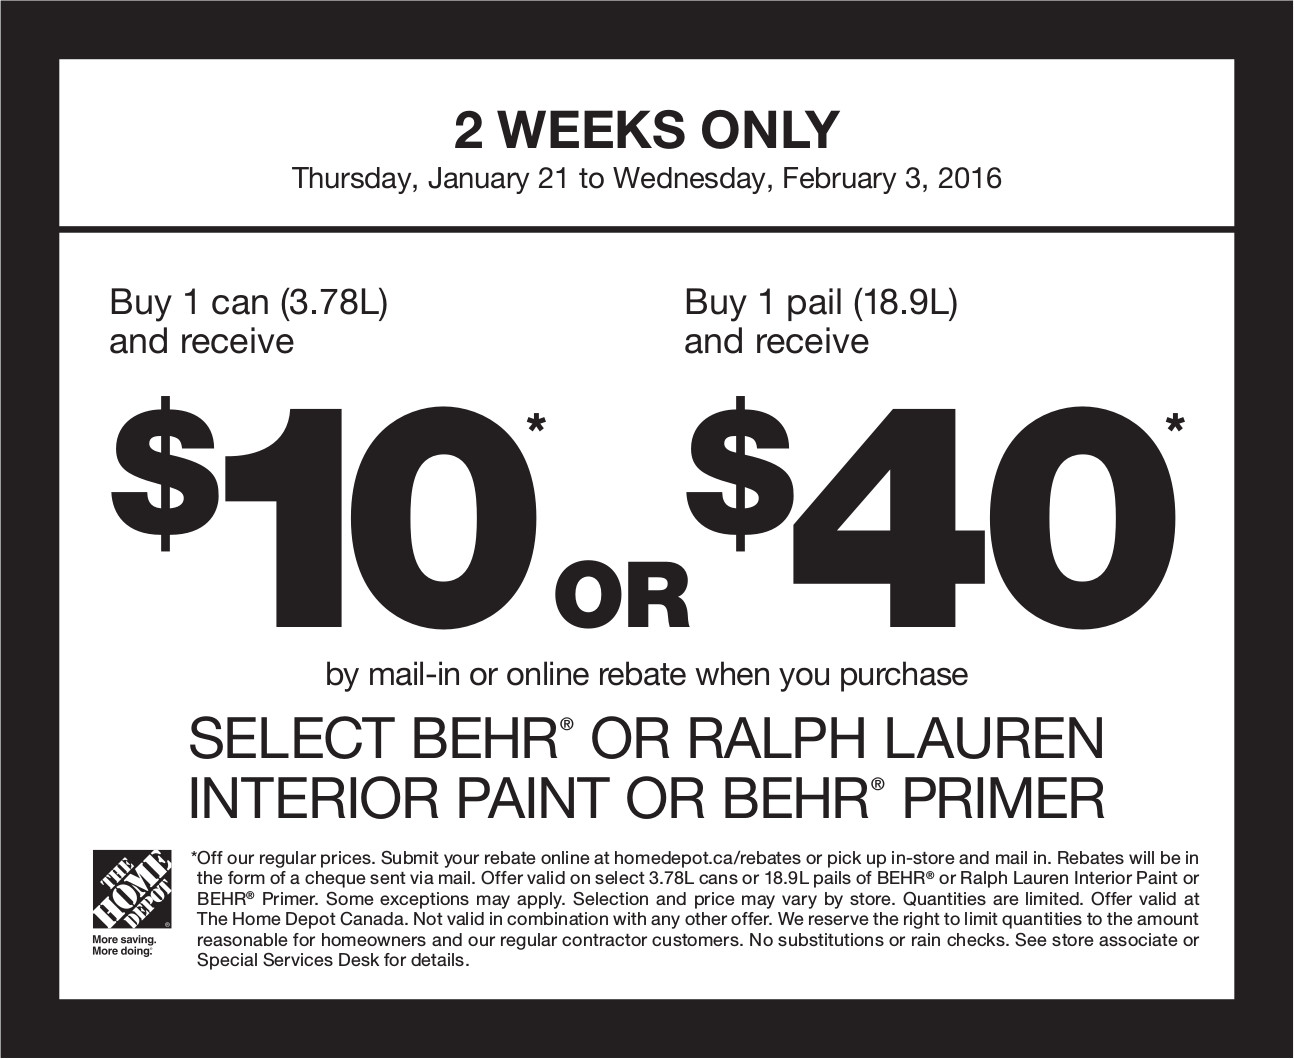 Home Depot Canada Paint Rebate Offer Buy 1 Can 3 78L And Receive 10 